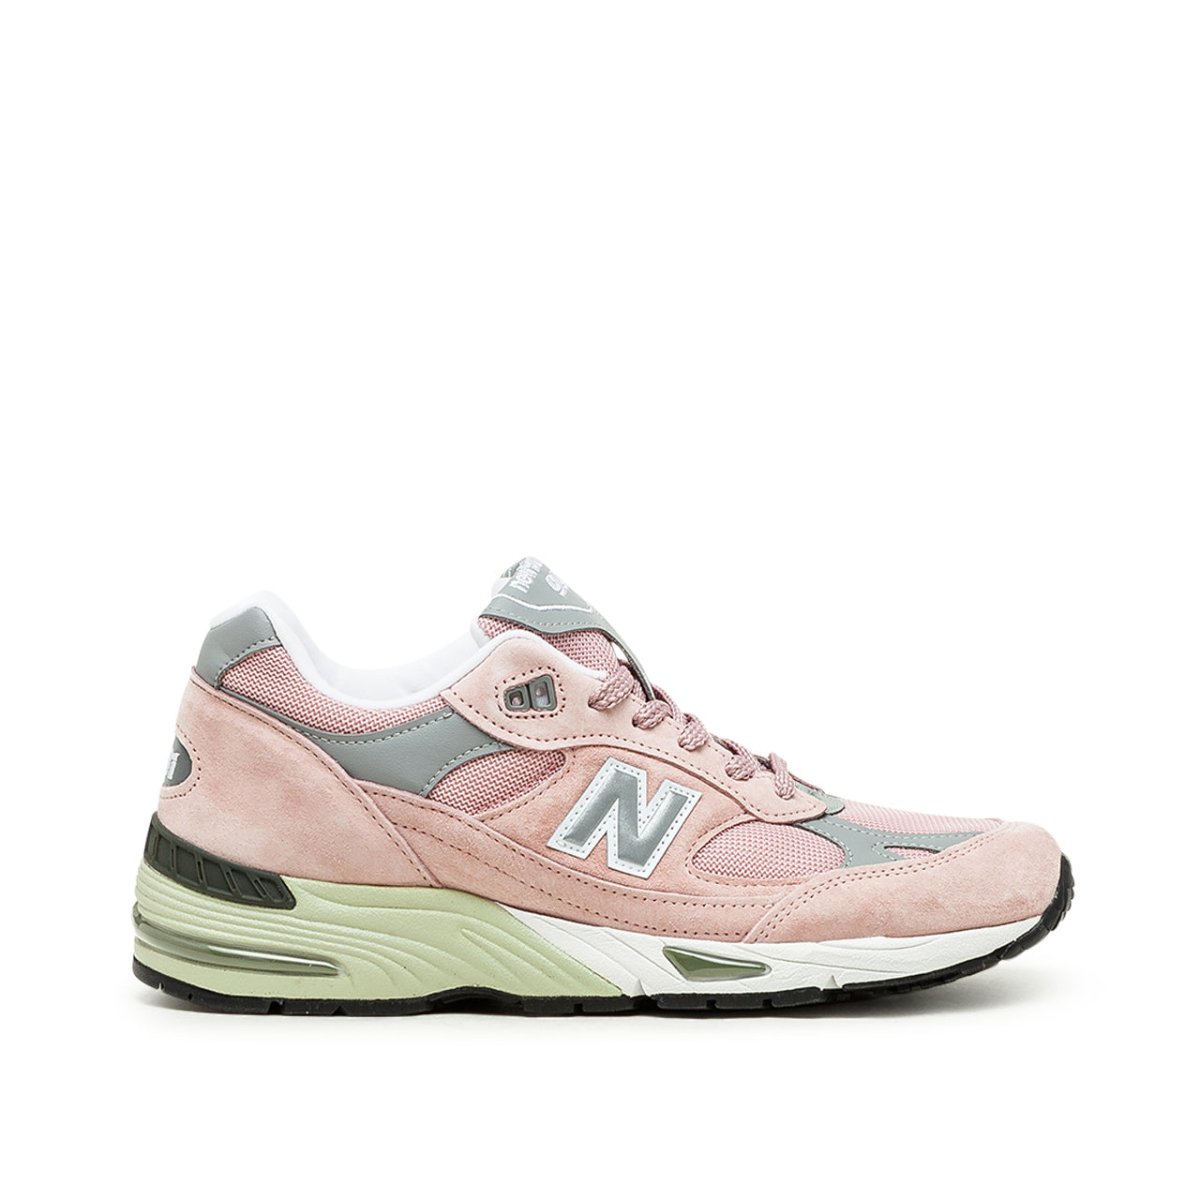 New Balance W991 PNK Core Pink 'Made in England' (Rosa)  - Allike Store